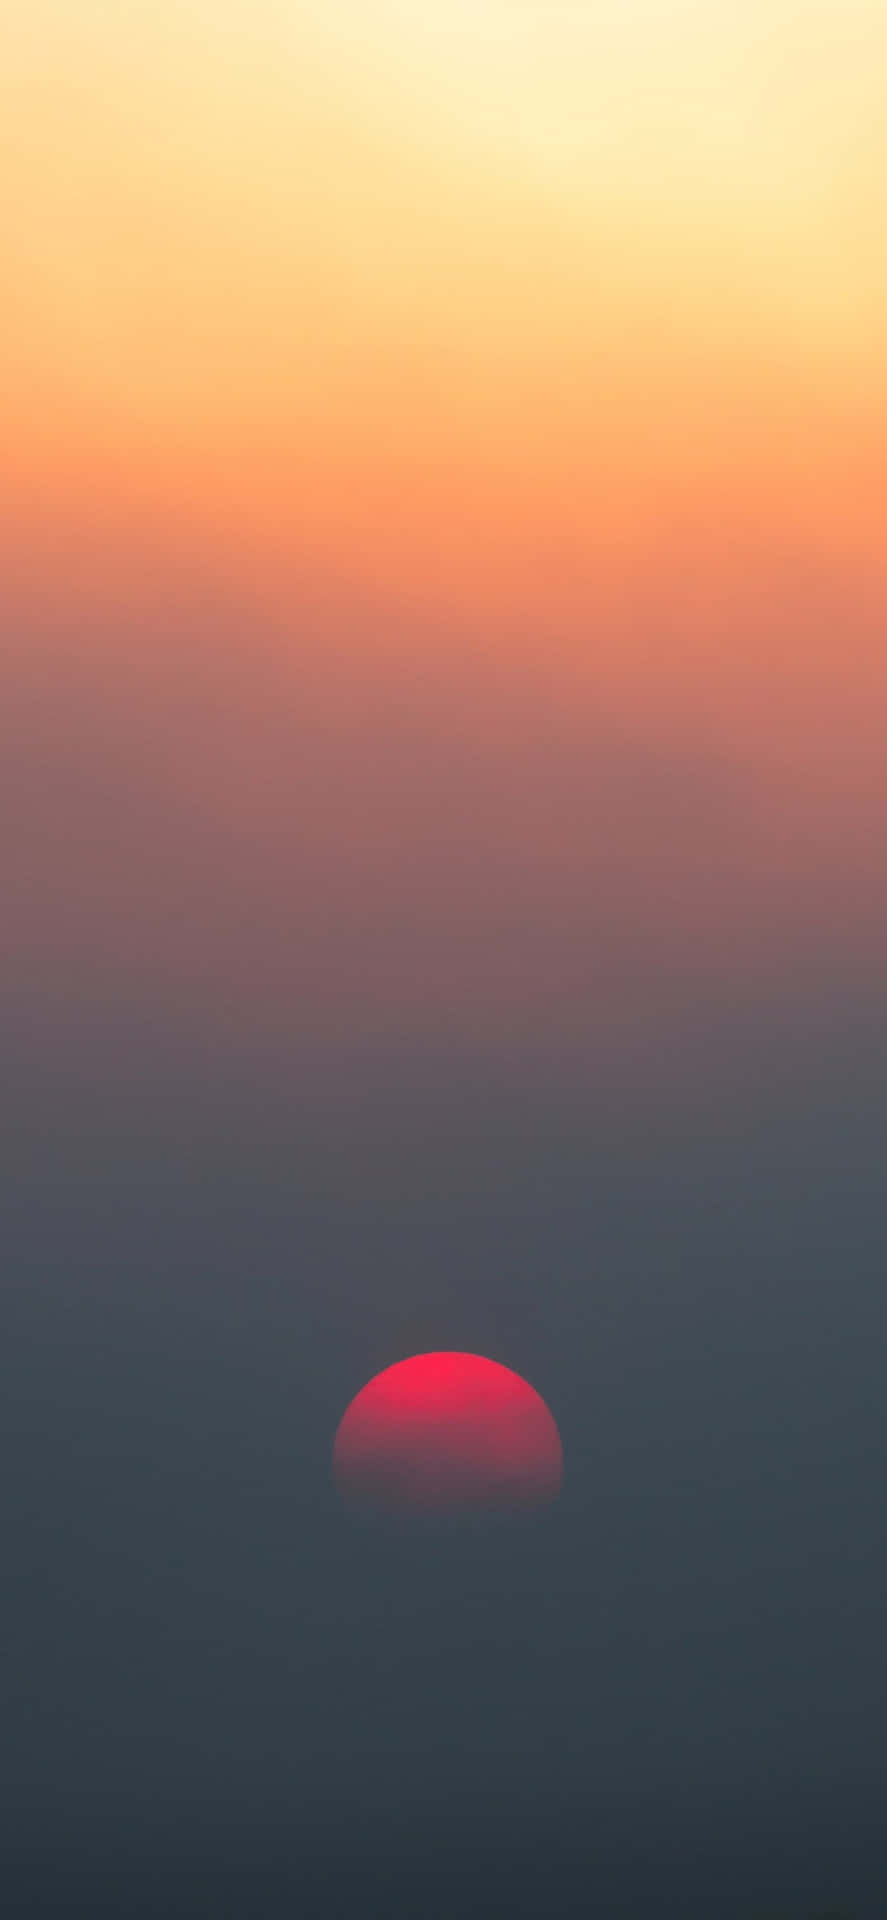 A Red Sun Rising Over A Fog Filled Sky Wallpaper